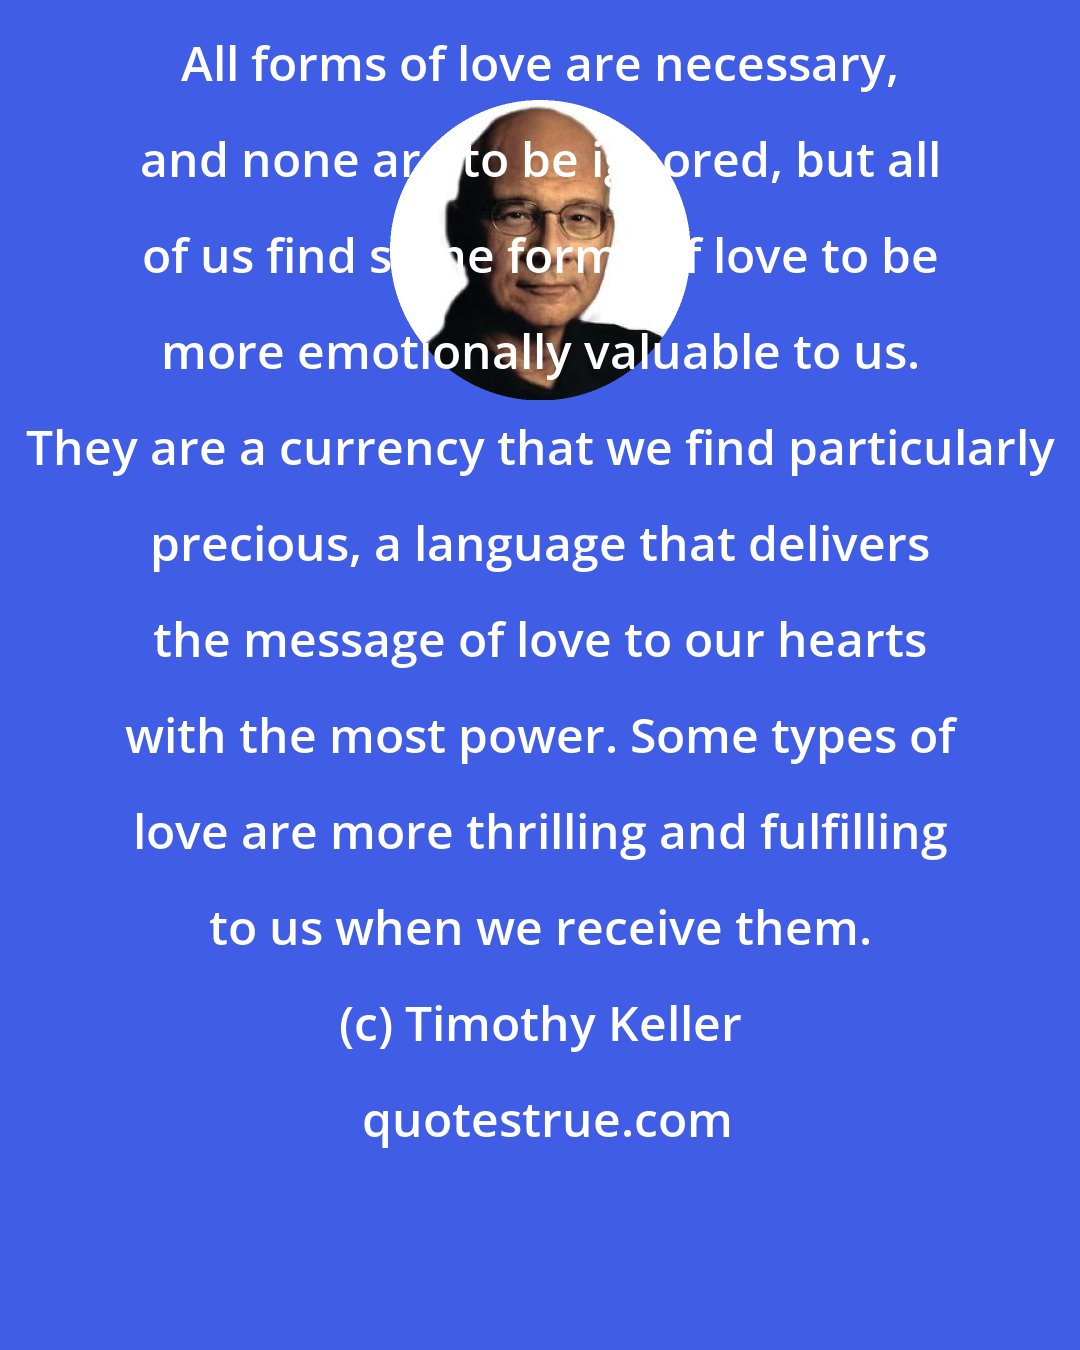 Timothy Keller: All forms of love are necessary, and none are to be ignored, but all of us find some forms of love to be more emotionally valuable to us. They are a currency that we find particularly precious, a language that delivers the message of love to our hearts with the most power. Some types of love are more thrilling and fulfilling to us when we receive them.